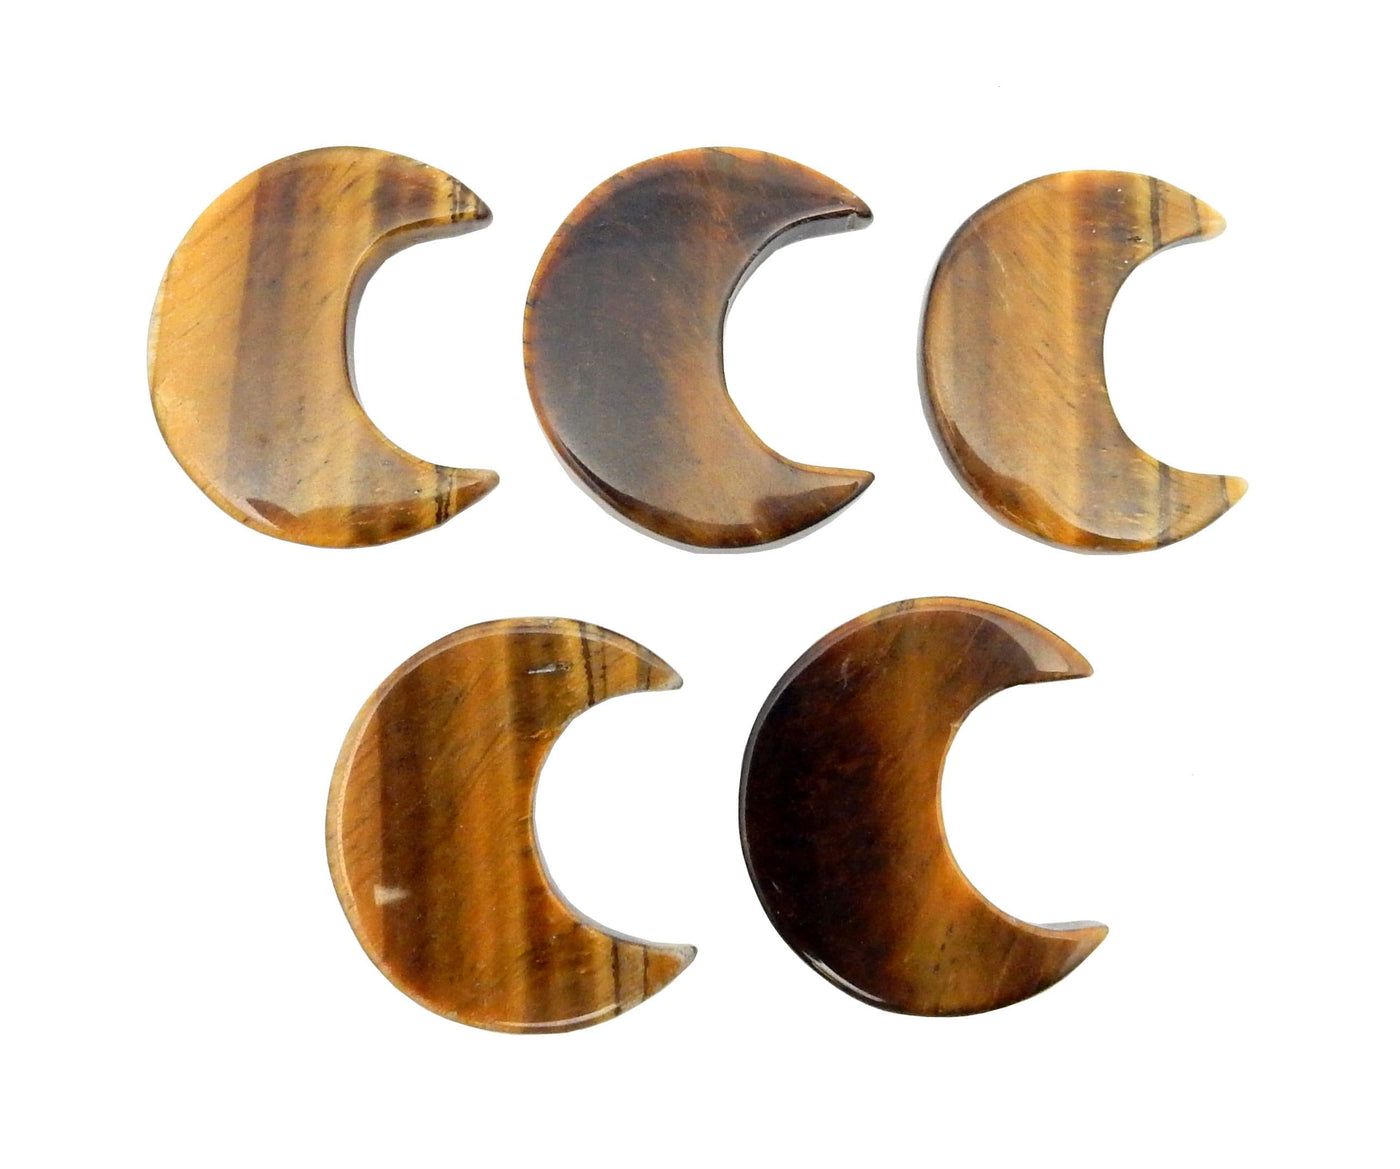 Five Tigers Eye Half Crescent Moons - Drilled, displayed on a white surface.